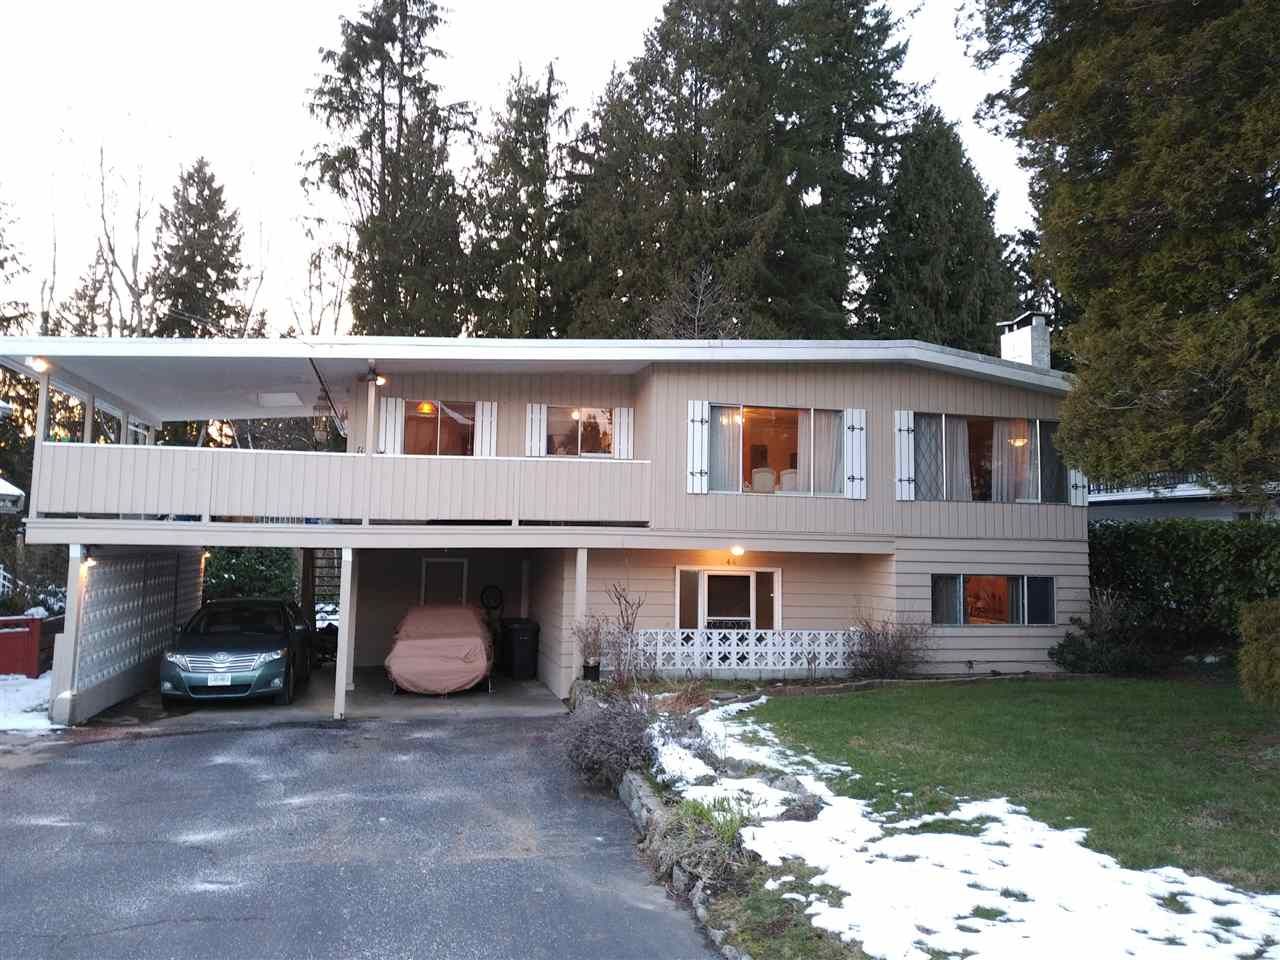 Main Photo: 444 GLENHOLME STREET in Coquitlam: Central Coquitlam House for sale : MLS®# R2243746